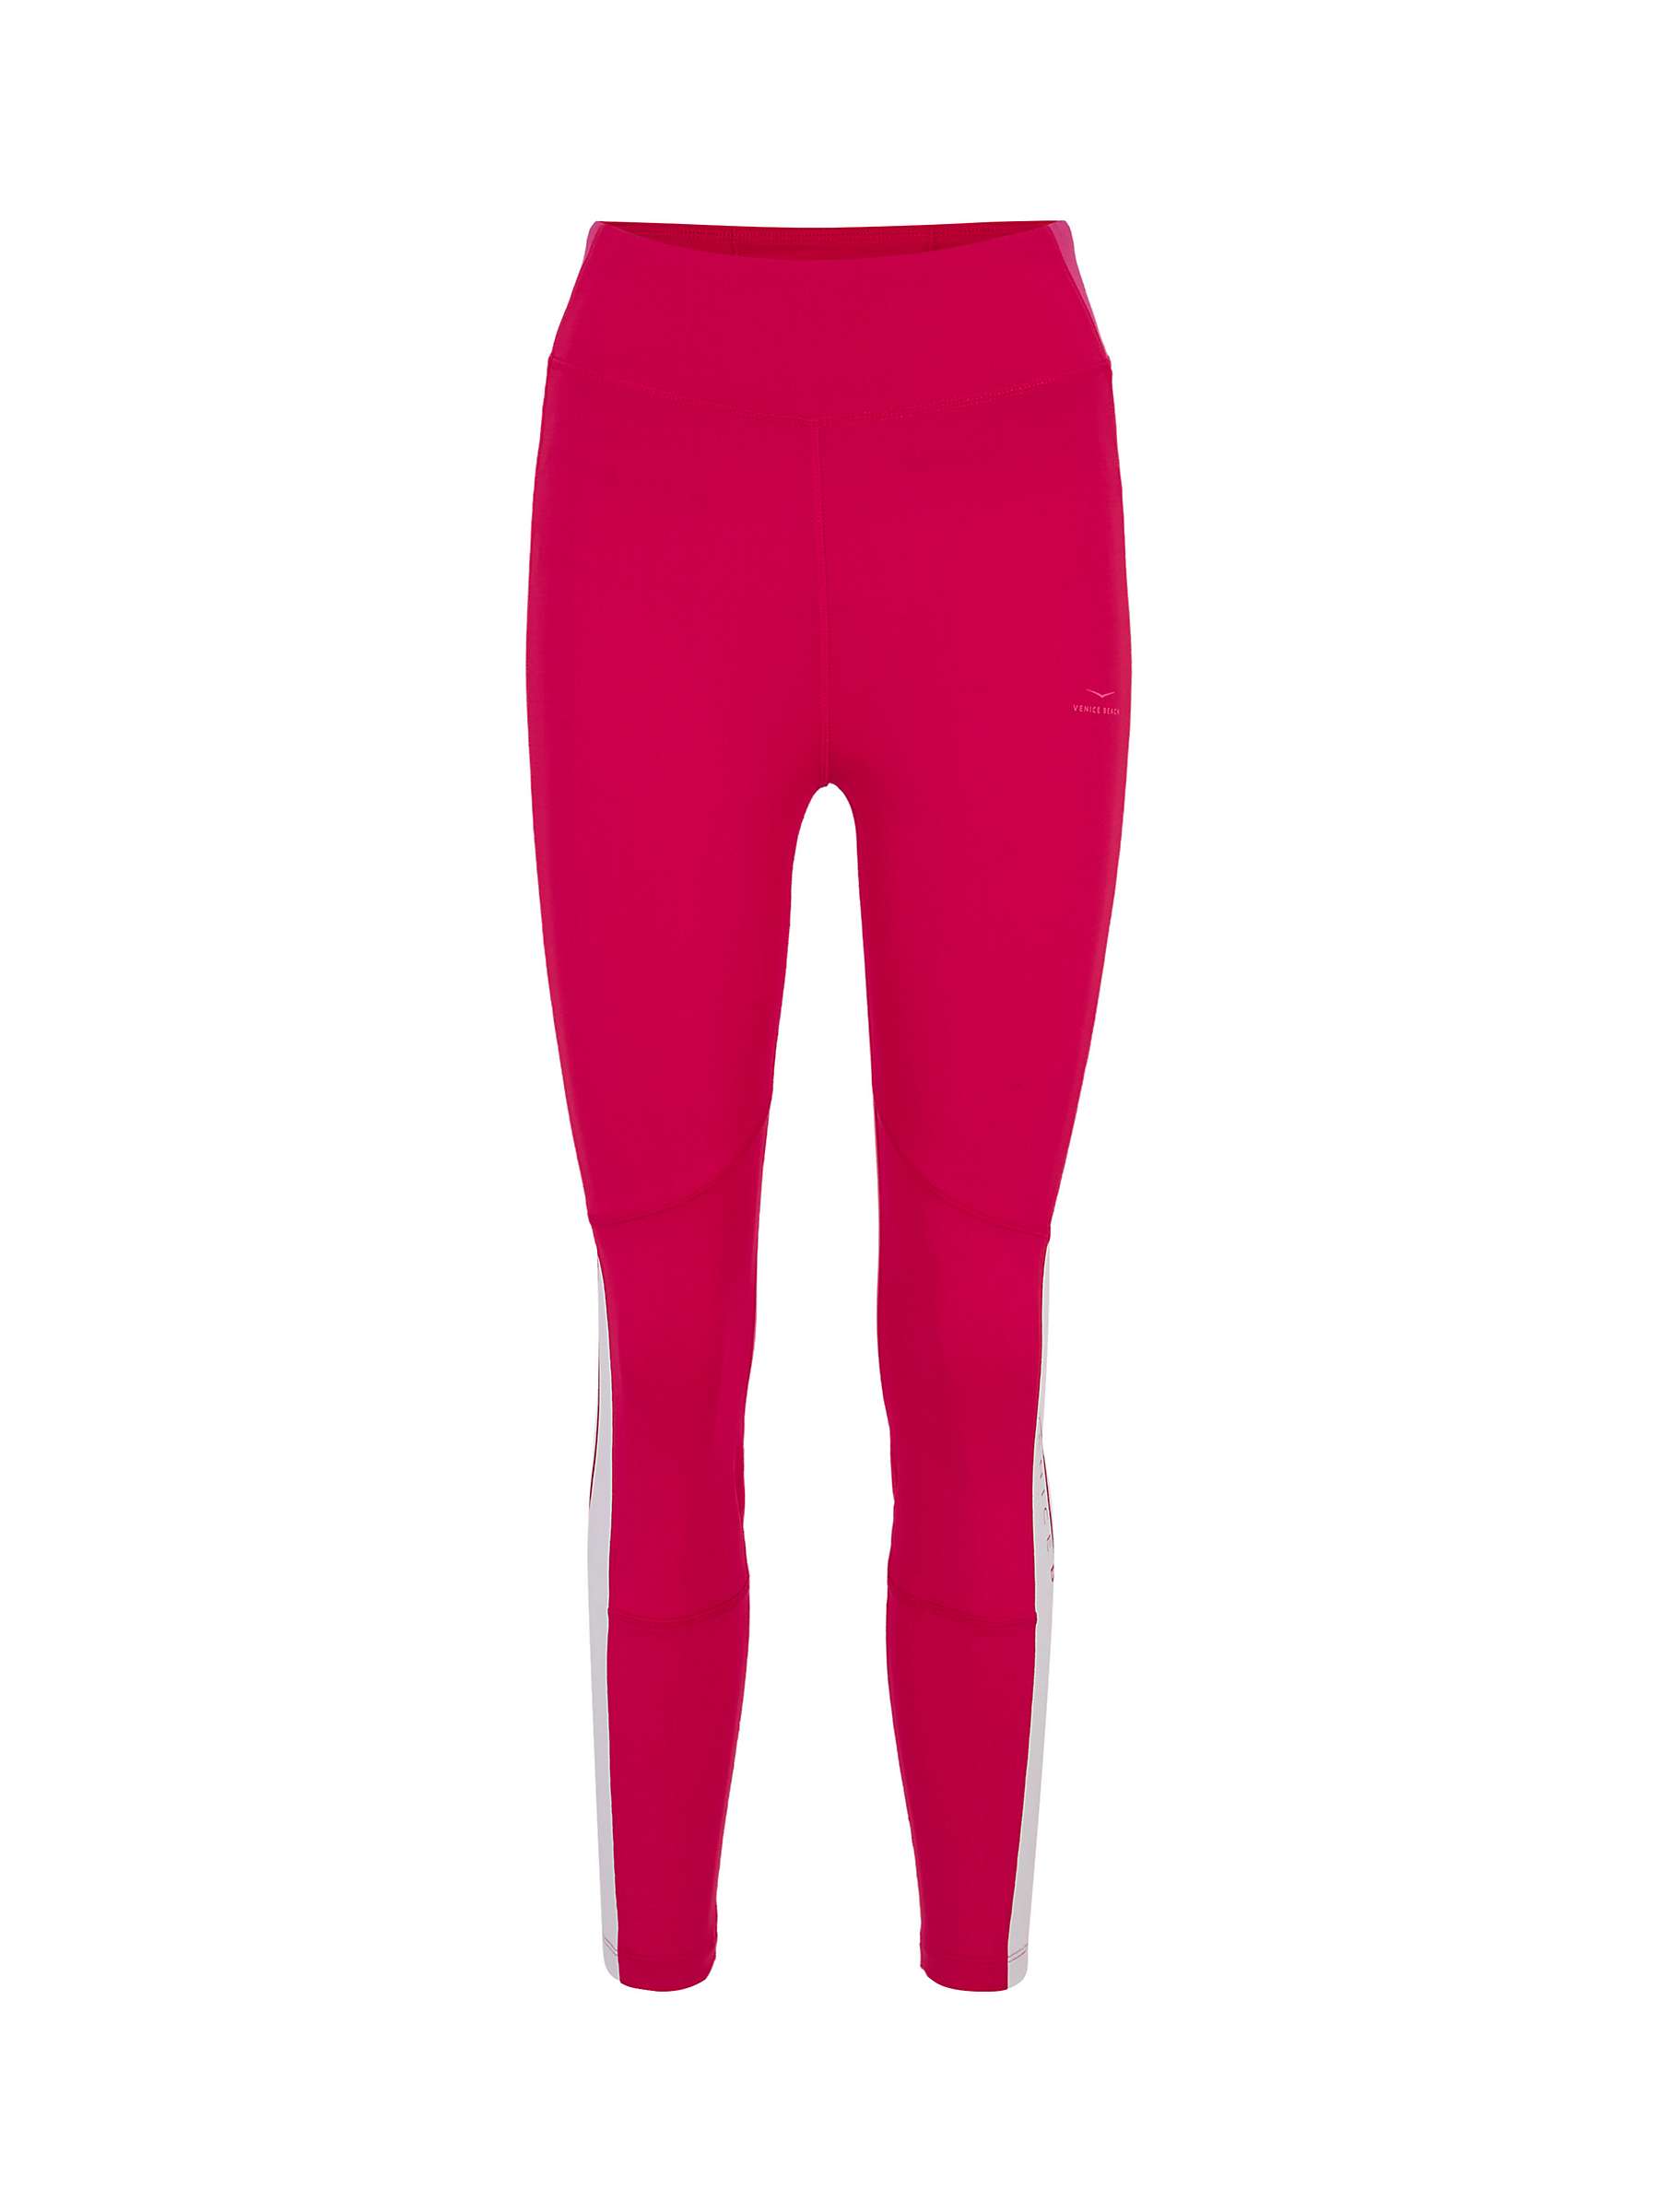 Buy Venice Beach Clifia 7/8 Sports Leggings, Ruby Red/Virtual Pink Online at johnlewis.com